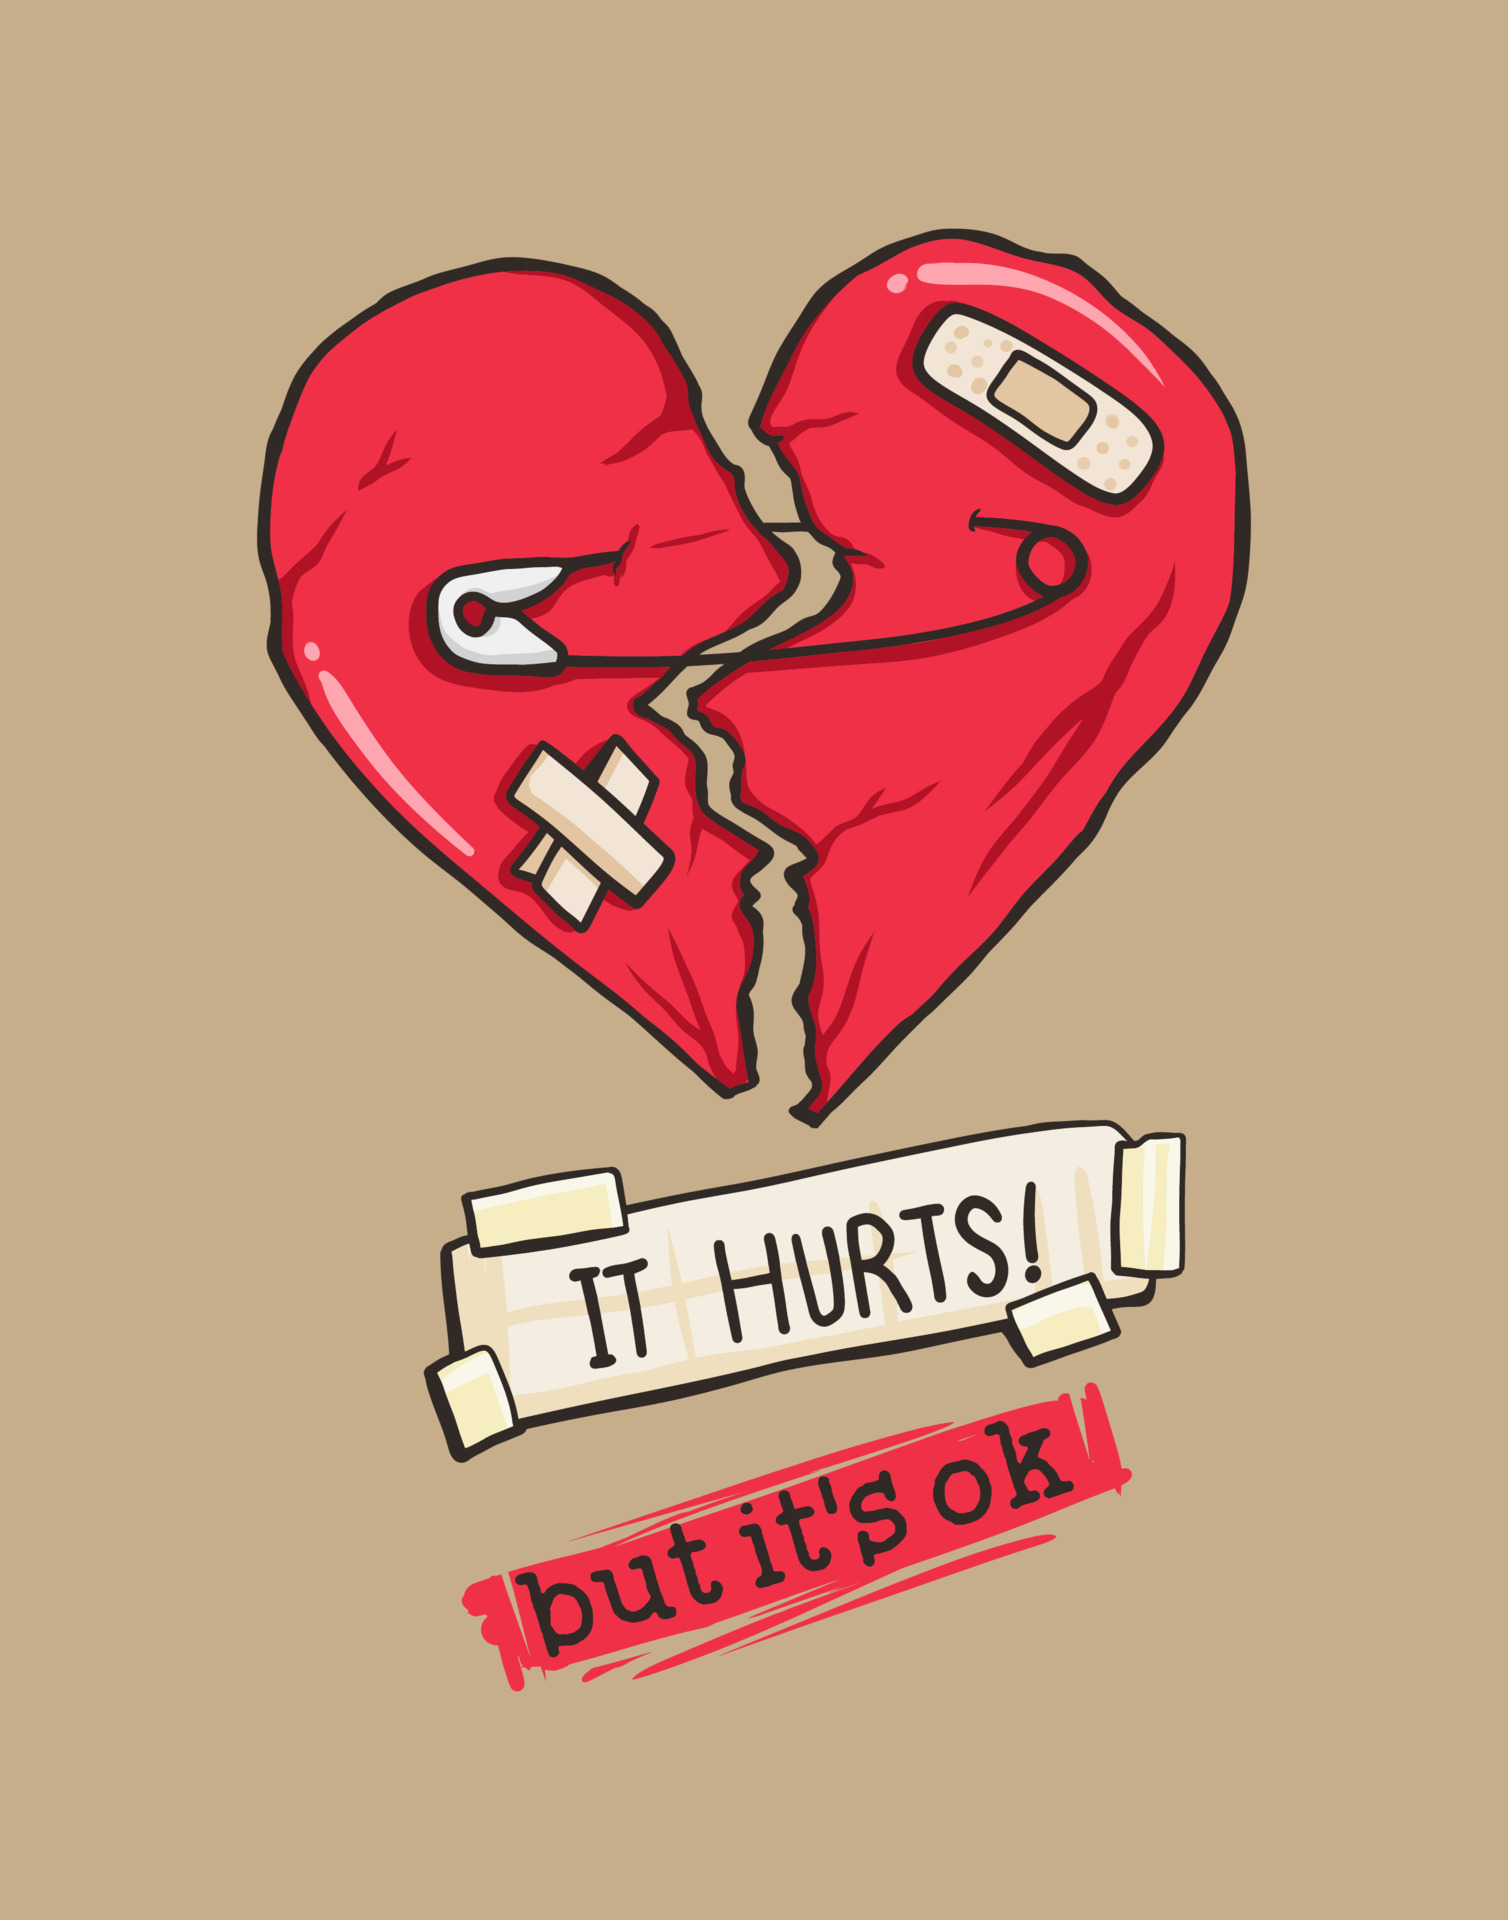 Broken heart fix with pin and bandages vector illustration 8101339